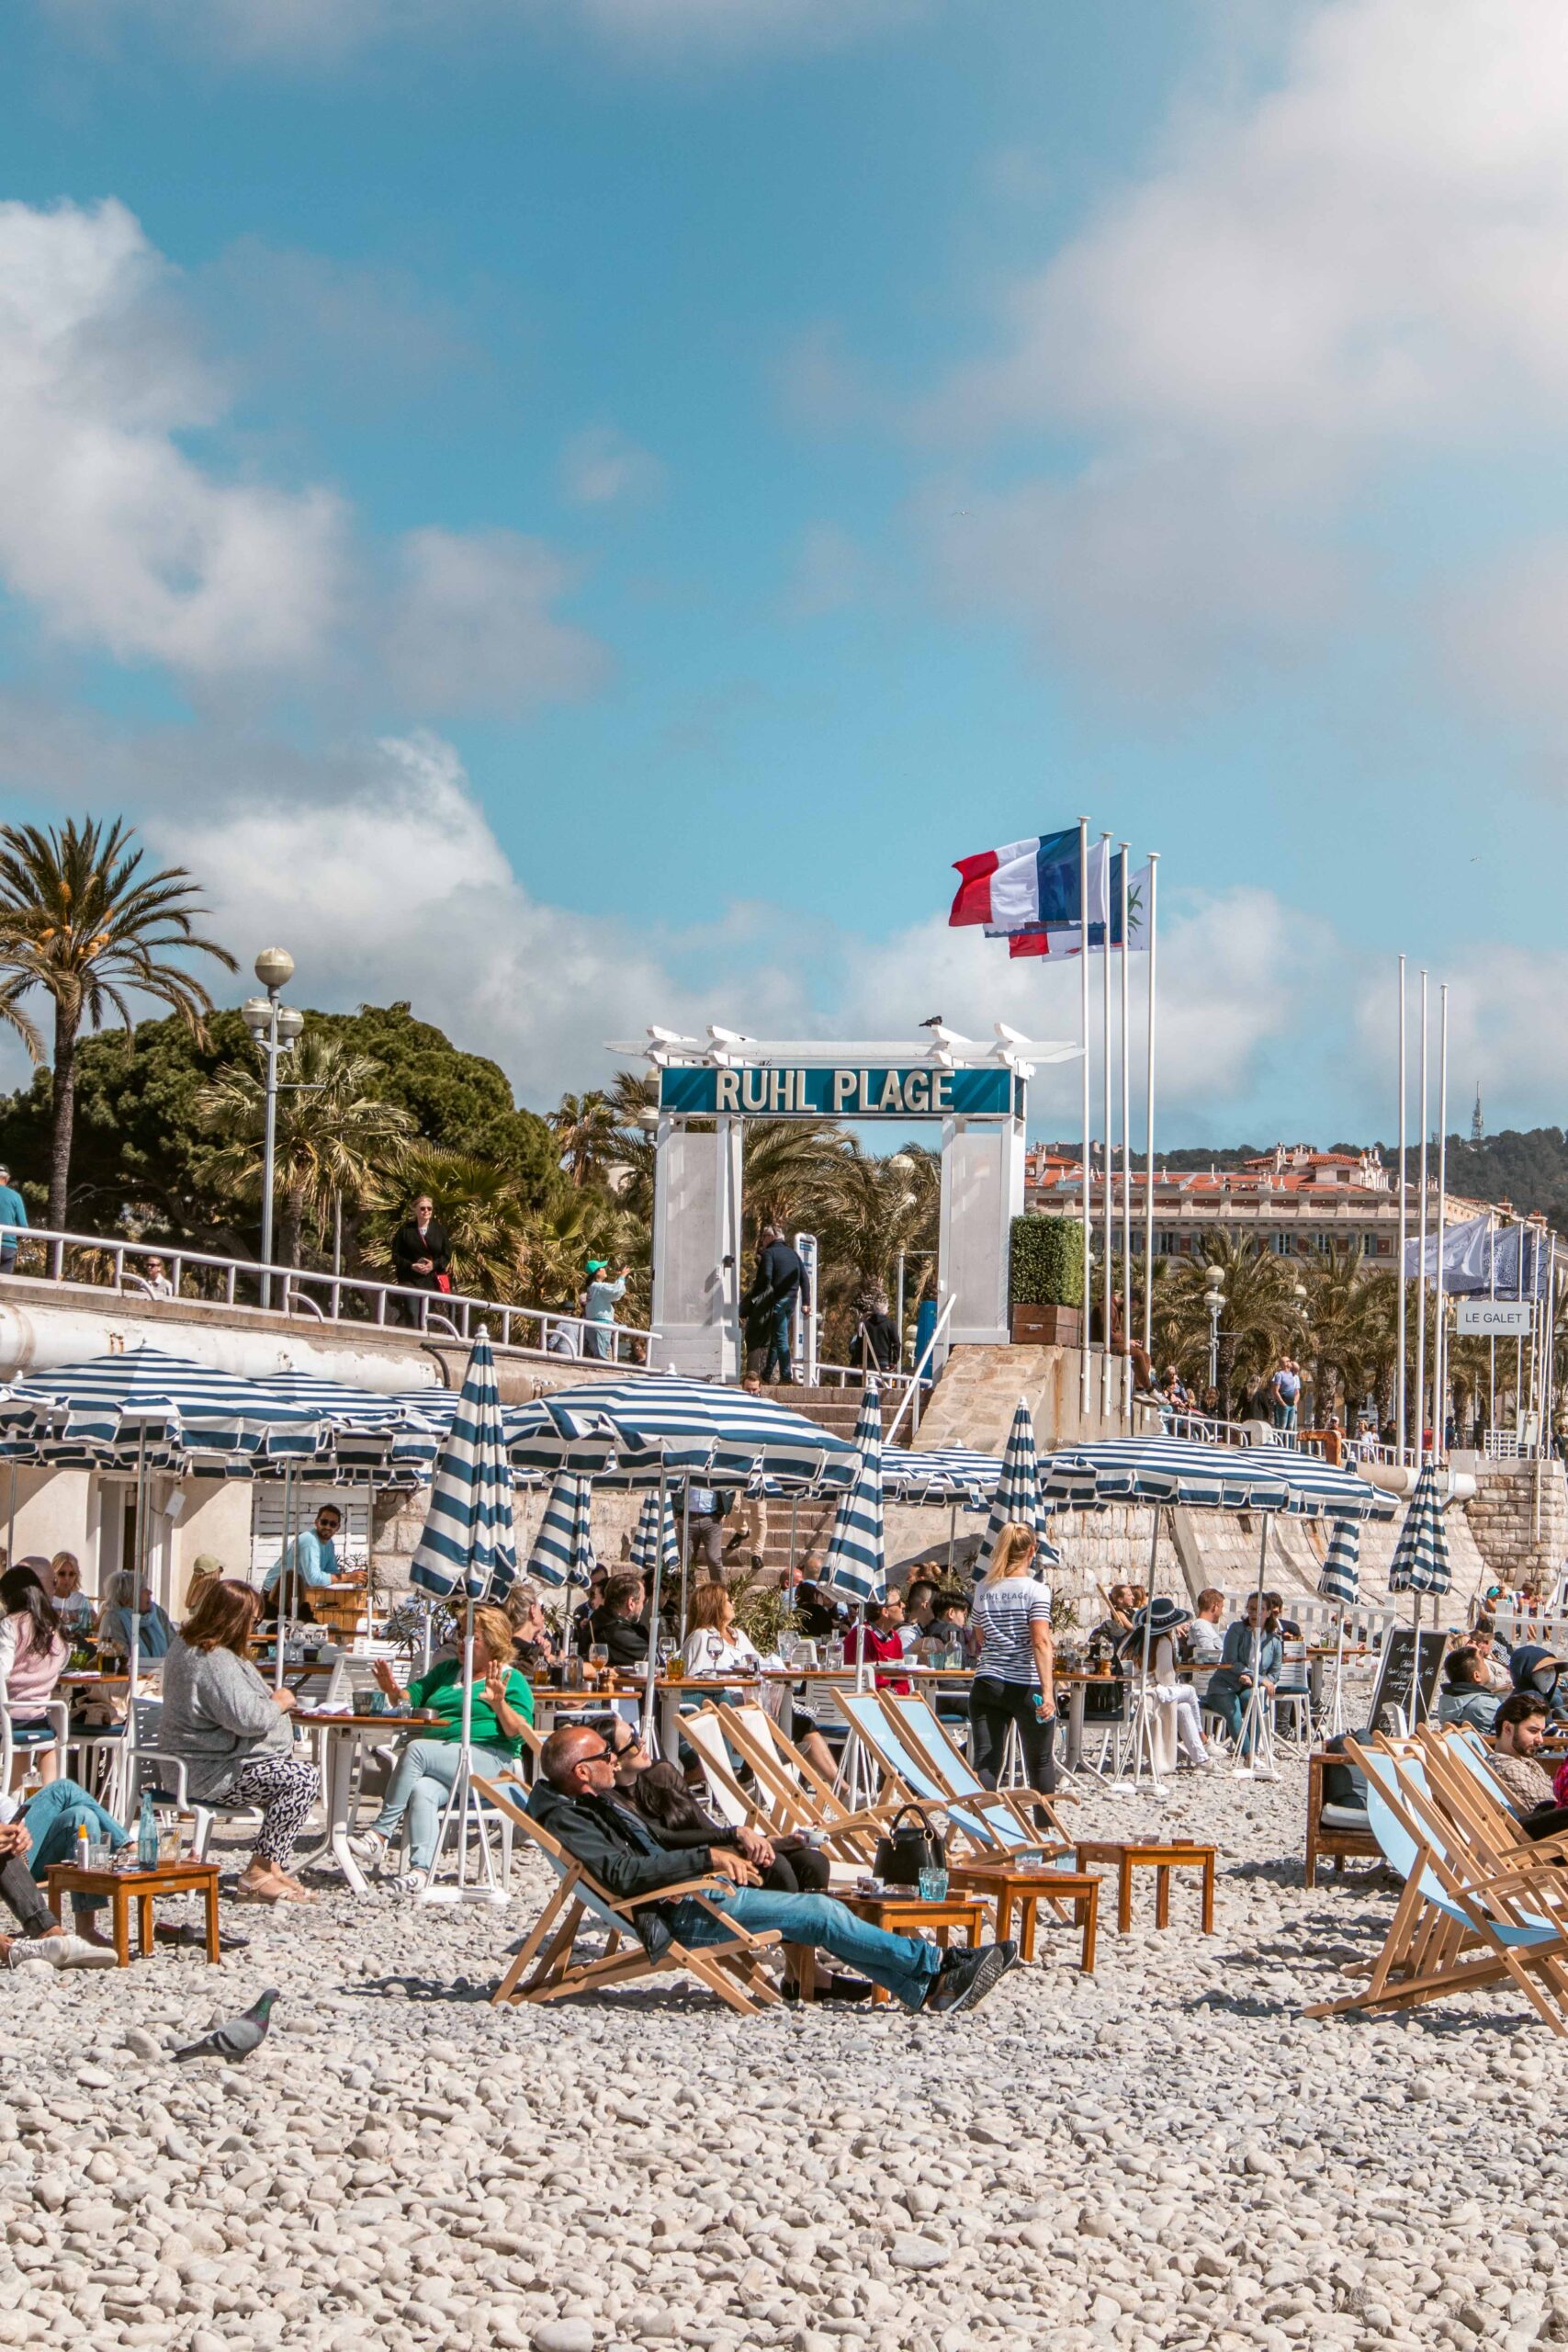 Deckchairs and beach umbrellas at the Ruhl plage as seen from the pebble beach along the Promenade des Anglais in Nice, France